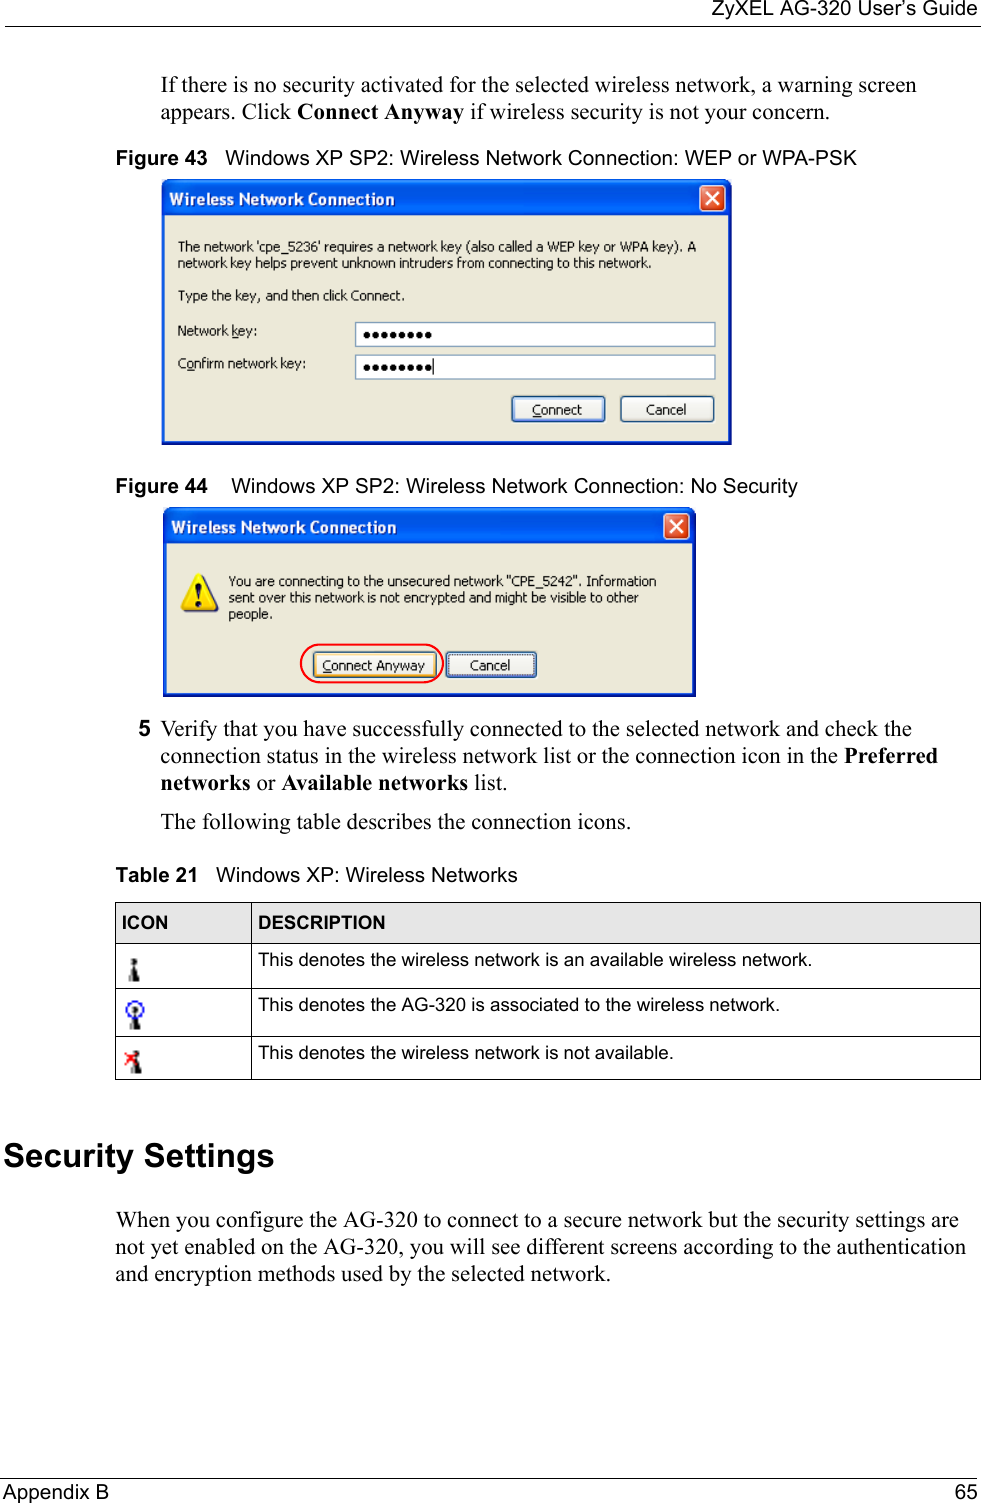 ZyXEL AG-320 User’s GuideAppendix B 65If there is no security activated for the selected wireless network, a warning screen appears. Click Connect Anyway if wireless security is not your concern.Figure 43   Windows XP SP2: Wireless Network Connection: WEP or WPA-PSKFigure 44    Windows XP SP2: Wireless Network Connection: No Security5Verify that you have successfully connected to the selected network and check the connection status in the wireless network list or the connection icon in the Preferred networks or Available networks list.The following table describes the connection icons.Security SettingsWhen you configure the AG-320 to connect to a secure network but the security settings are not yet enabled on the AG-320, you will see different screens according to the authentication and encryption methods used by the selected network.Table 21   Windows XP: Wireless NetworksICON DESCRIPTIONThis denotes the wireless network is an available wireless network.This denotes the AG-320 is associated to the wireless network.This denotes the wireless network is not available.